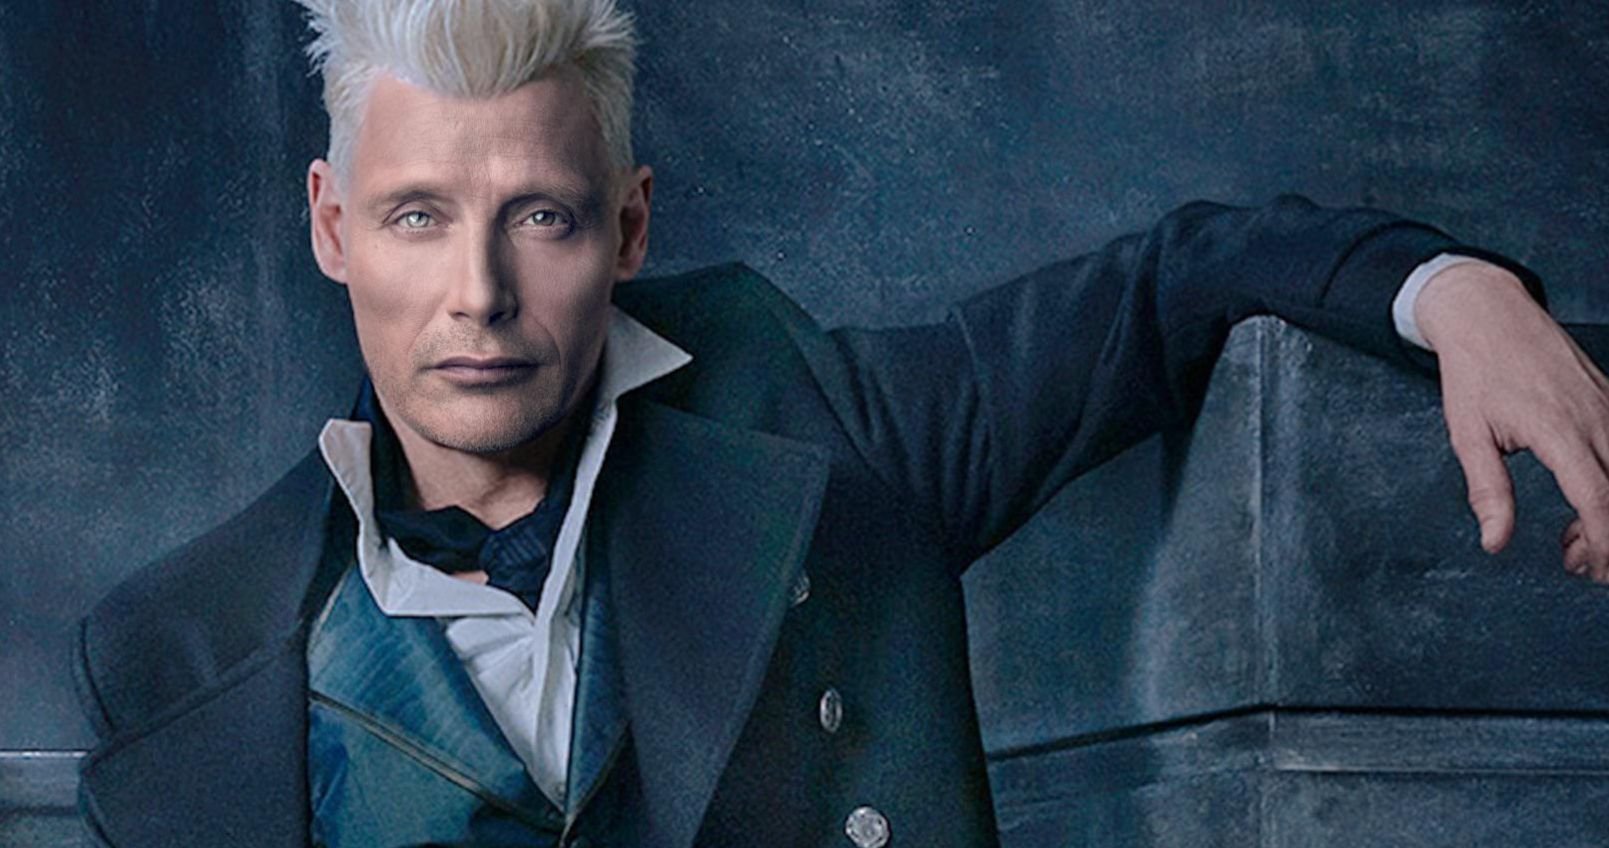 Mads Mikkelsen Explains How He's Making Grindelwald His Own in Fantastic Beasts 3